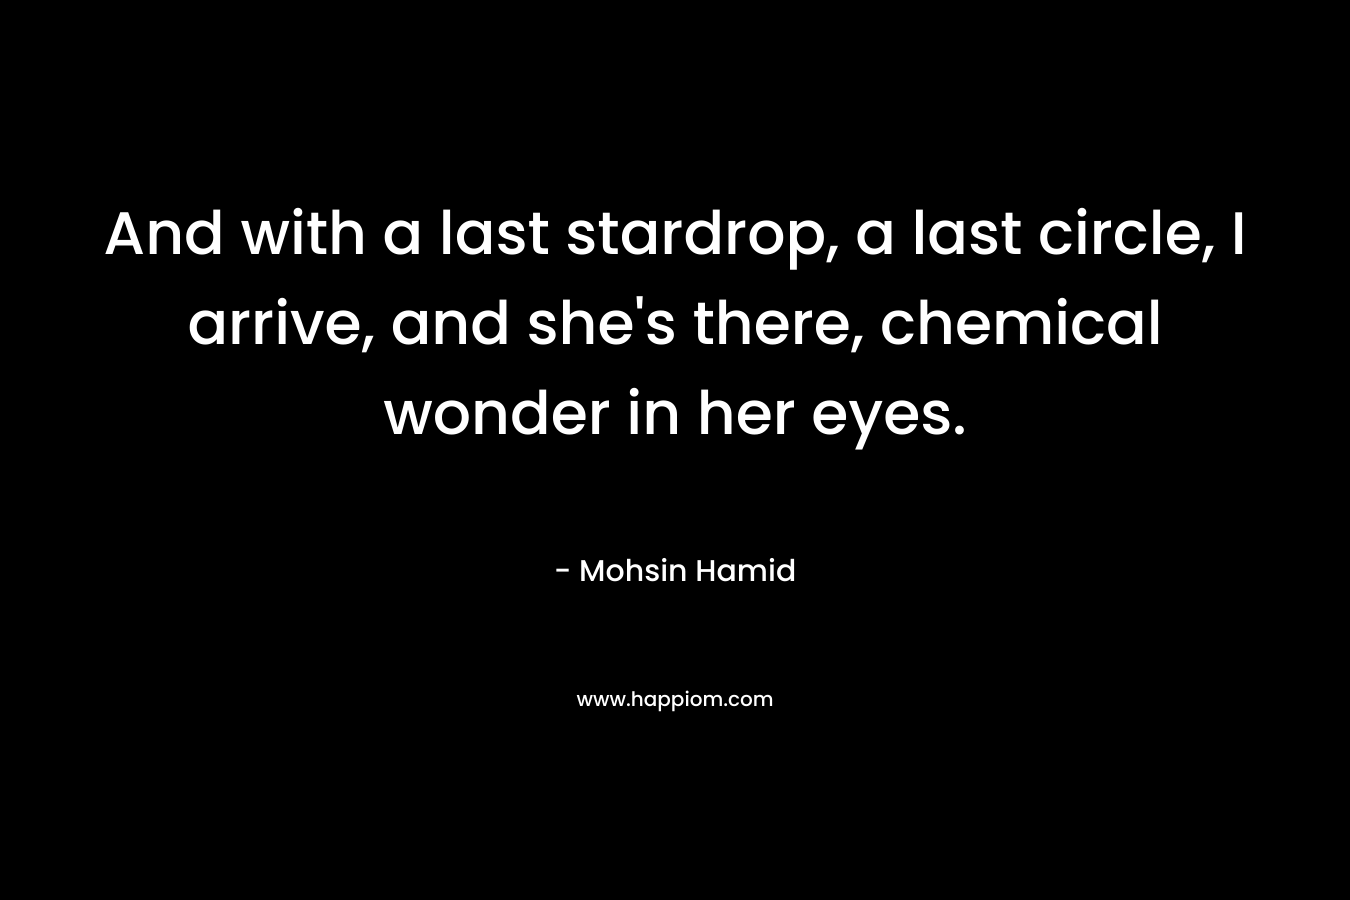 And with a last stardrop, a last circle, I arrive, and she’s there, chemical wonder in her eyes. – Mohsin Hamid